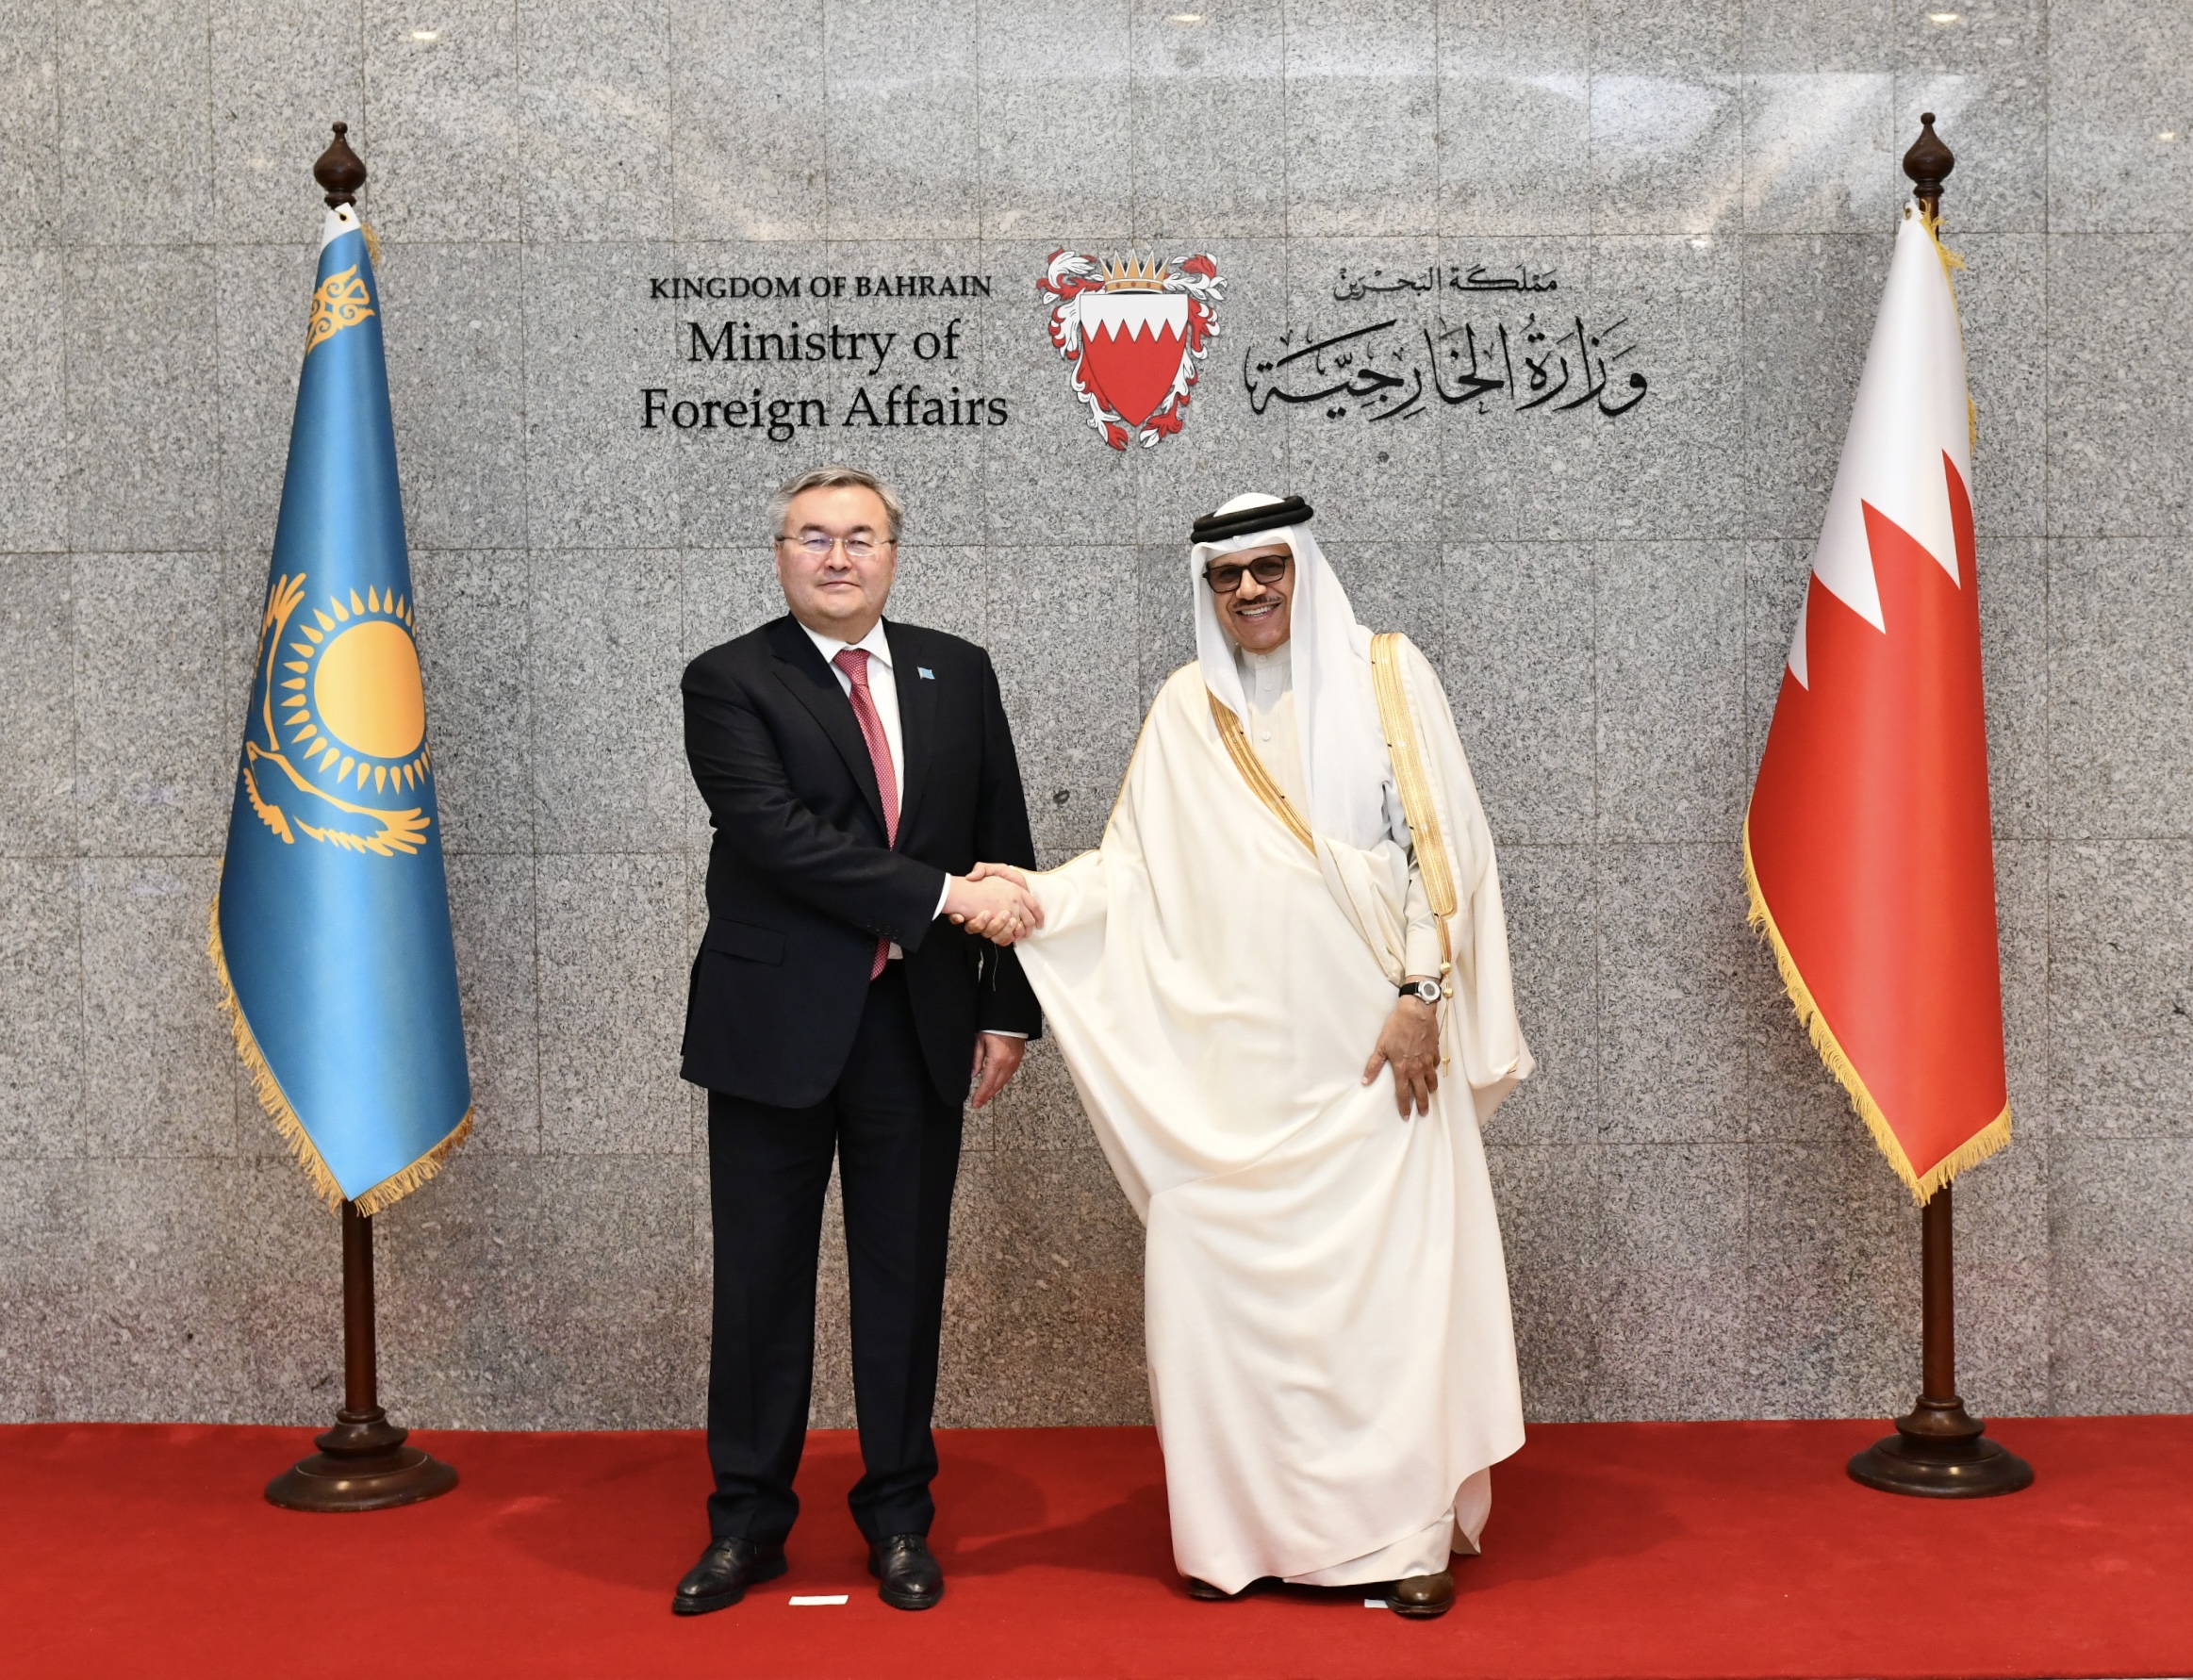 On Official Visit of Foreign Minister of Kazakhstan to Kingdom of Bahrain